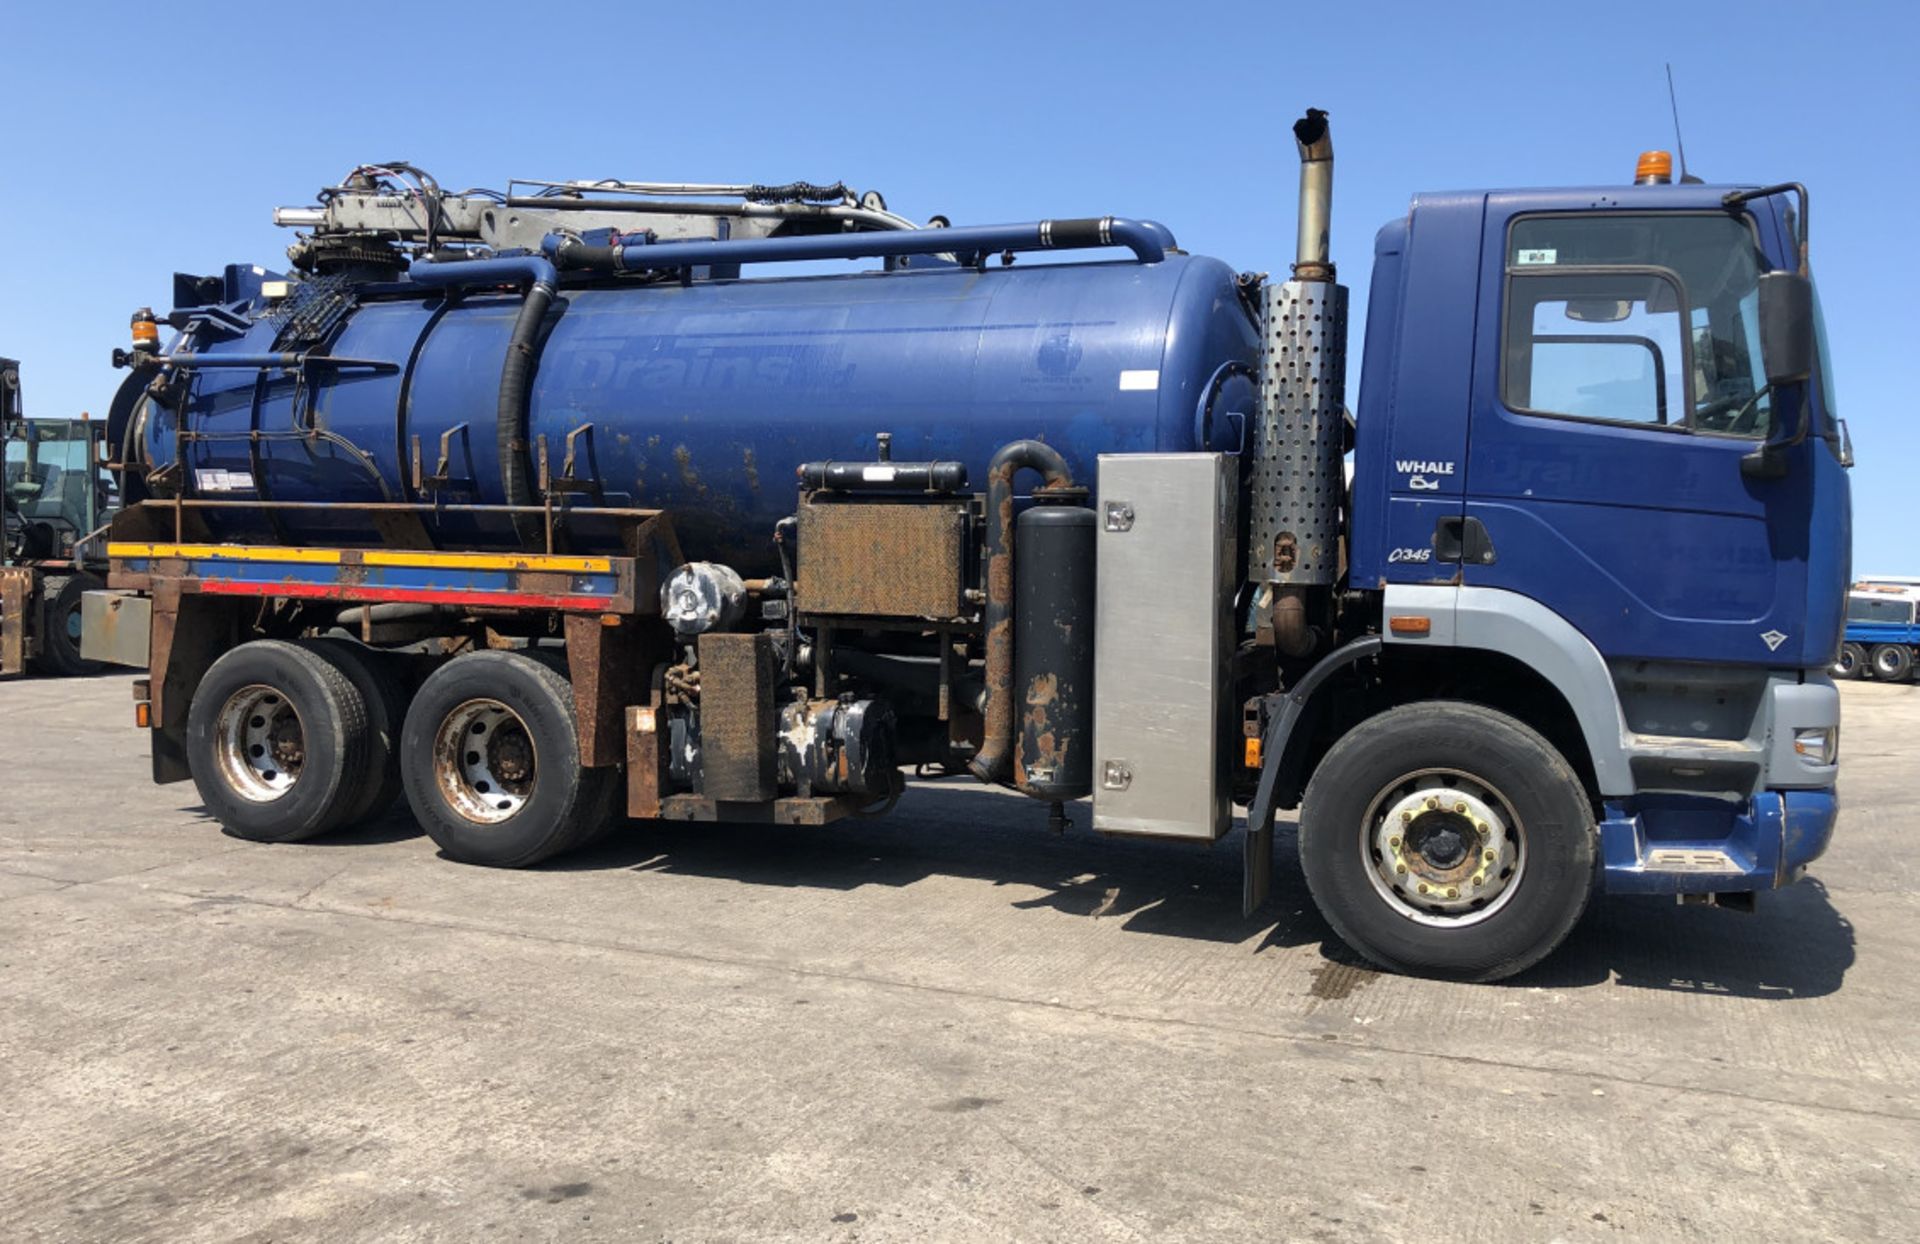 FODEN 6×4 WHALE VACUUM TANKER